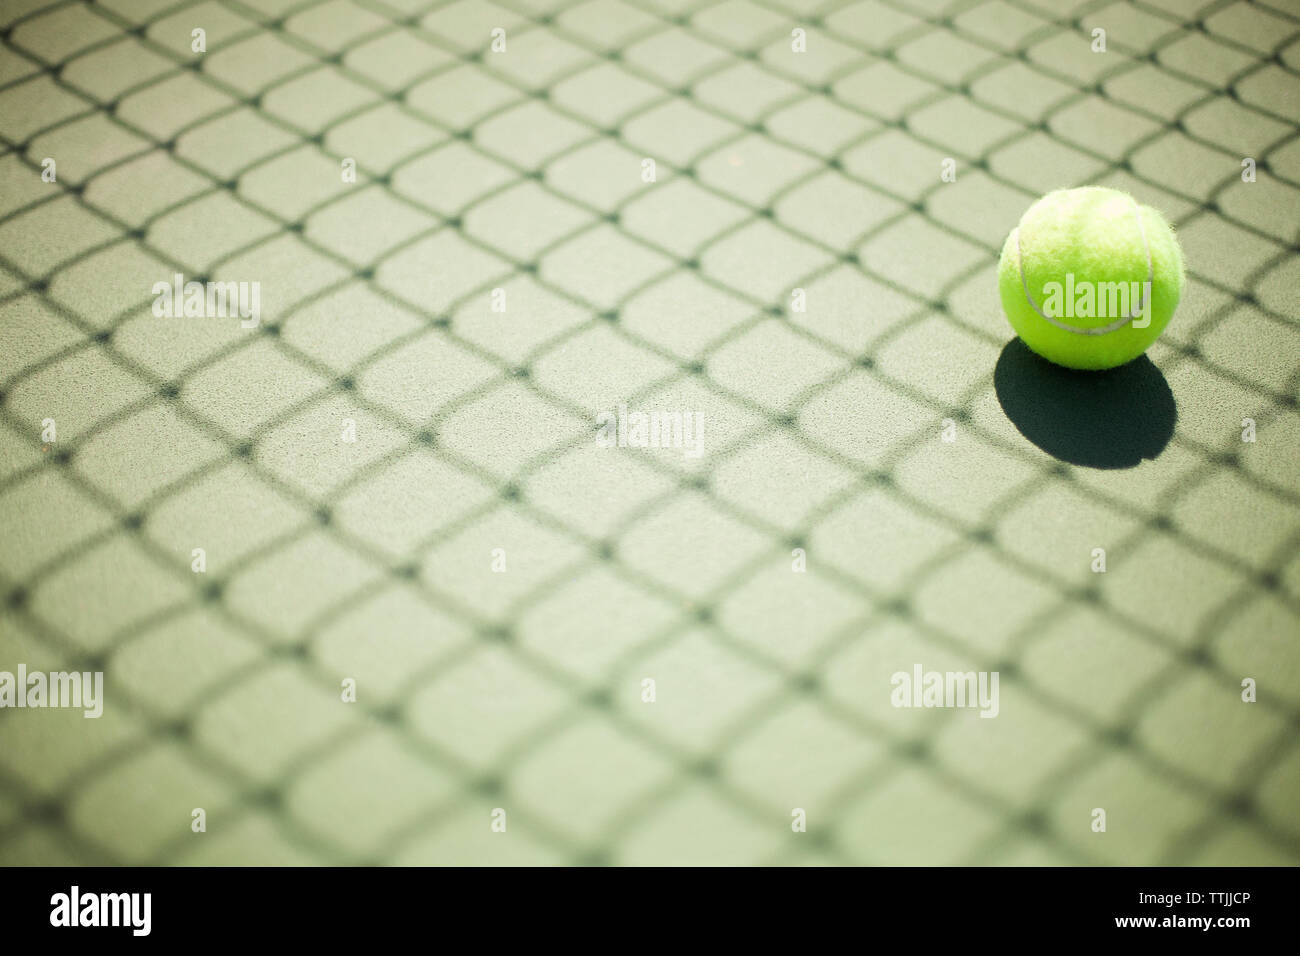 Tennis ball in court Stock Photo